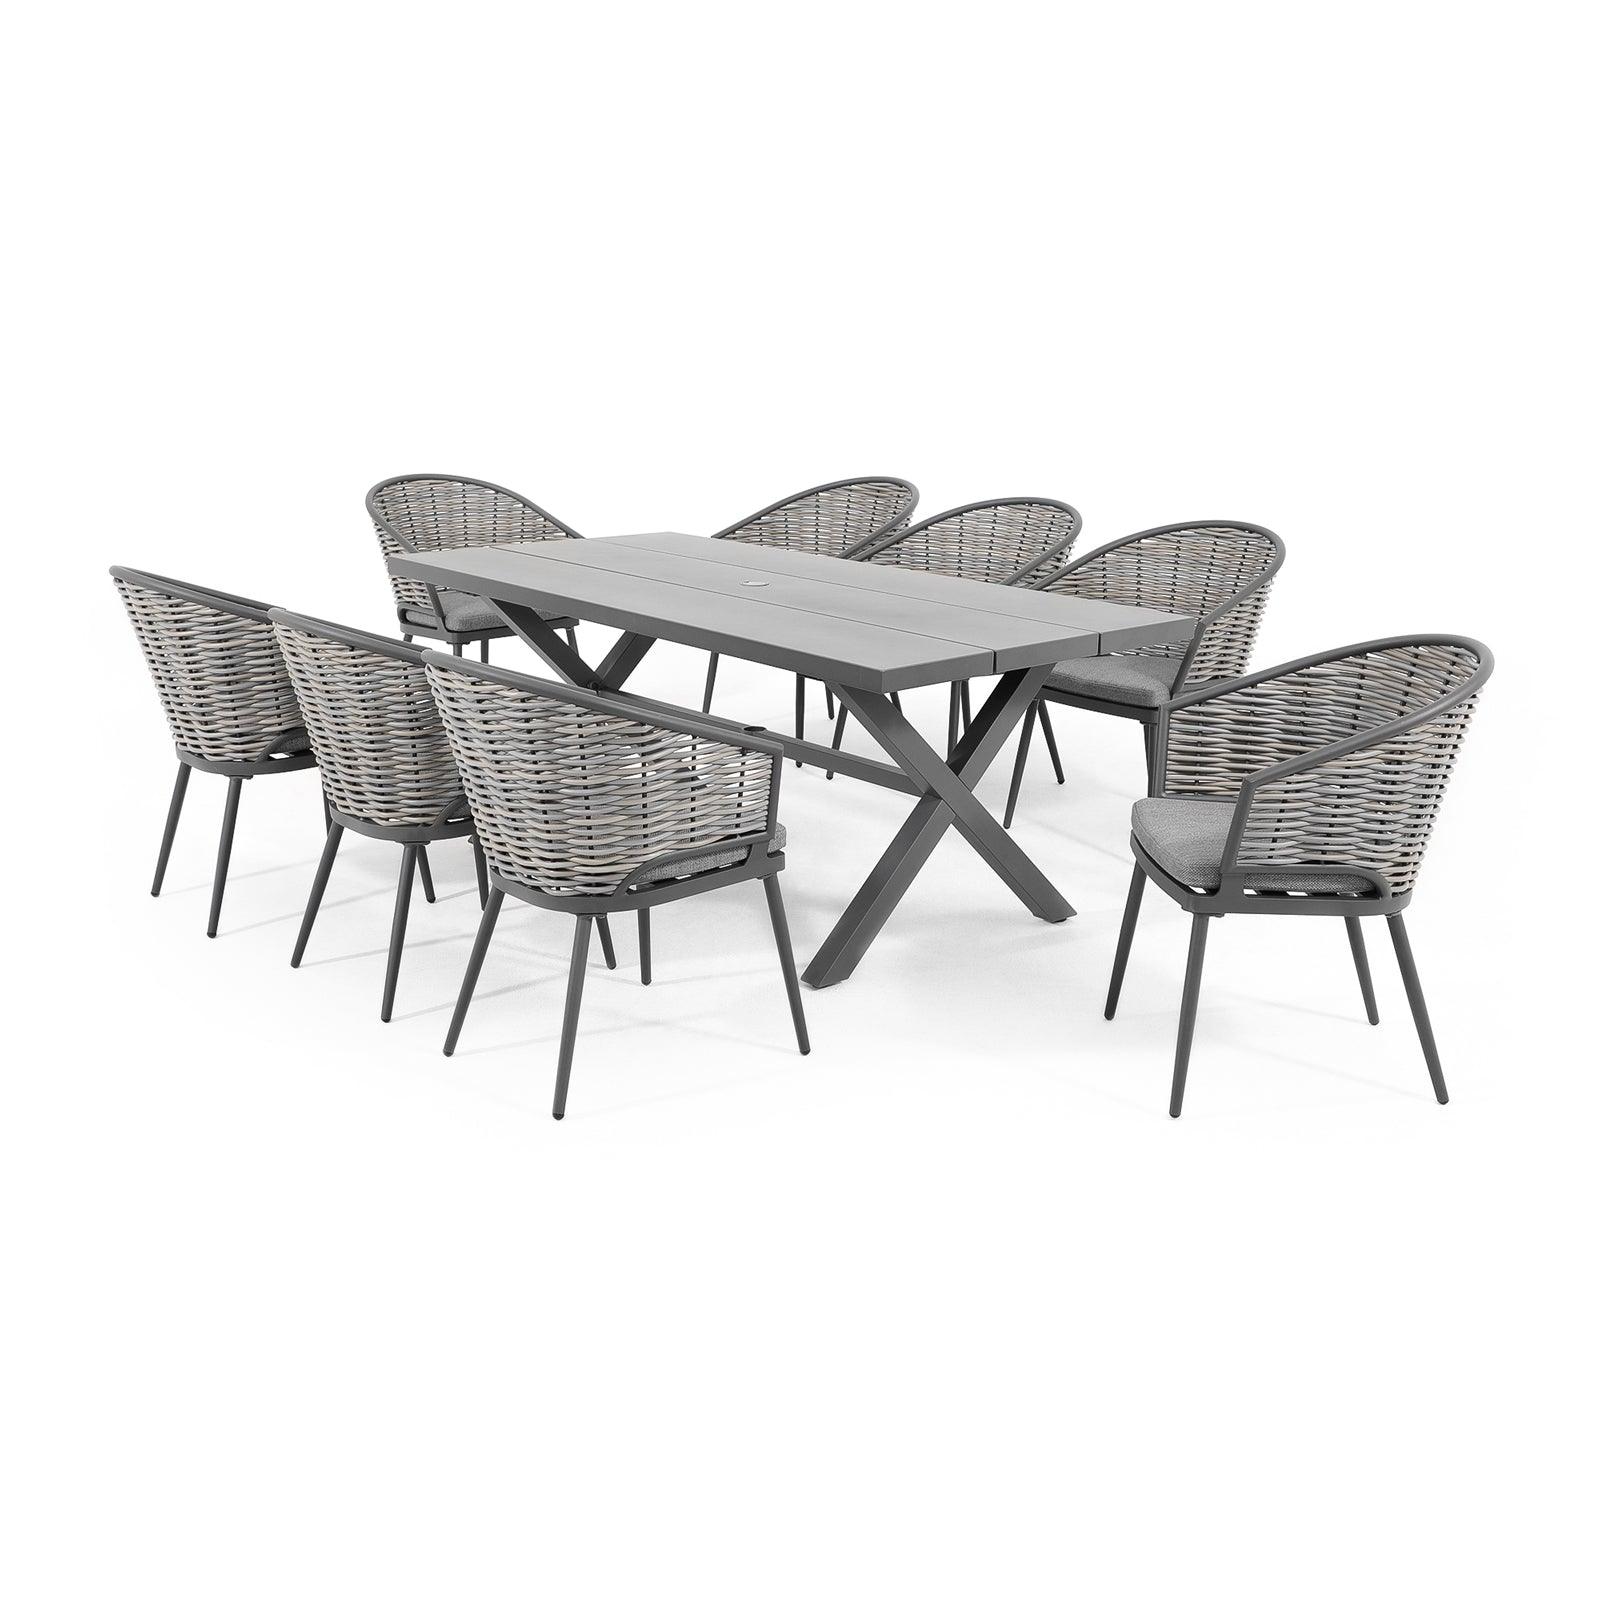 Burano Modern HDPE Wicker Outdoor Furniture, Grey wicker outdoor Dining Set with aluminum frame, 8 chairs with grey cushions, 1 aluminum X-Shaped rectangle dining Table - Jardina Furniture #Pieces_9-pc.